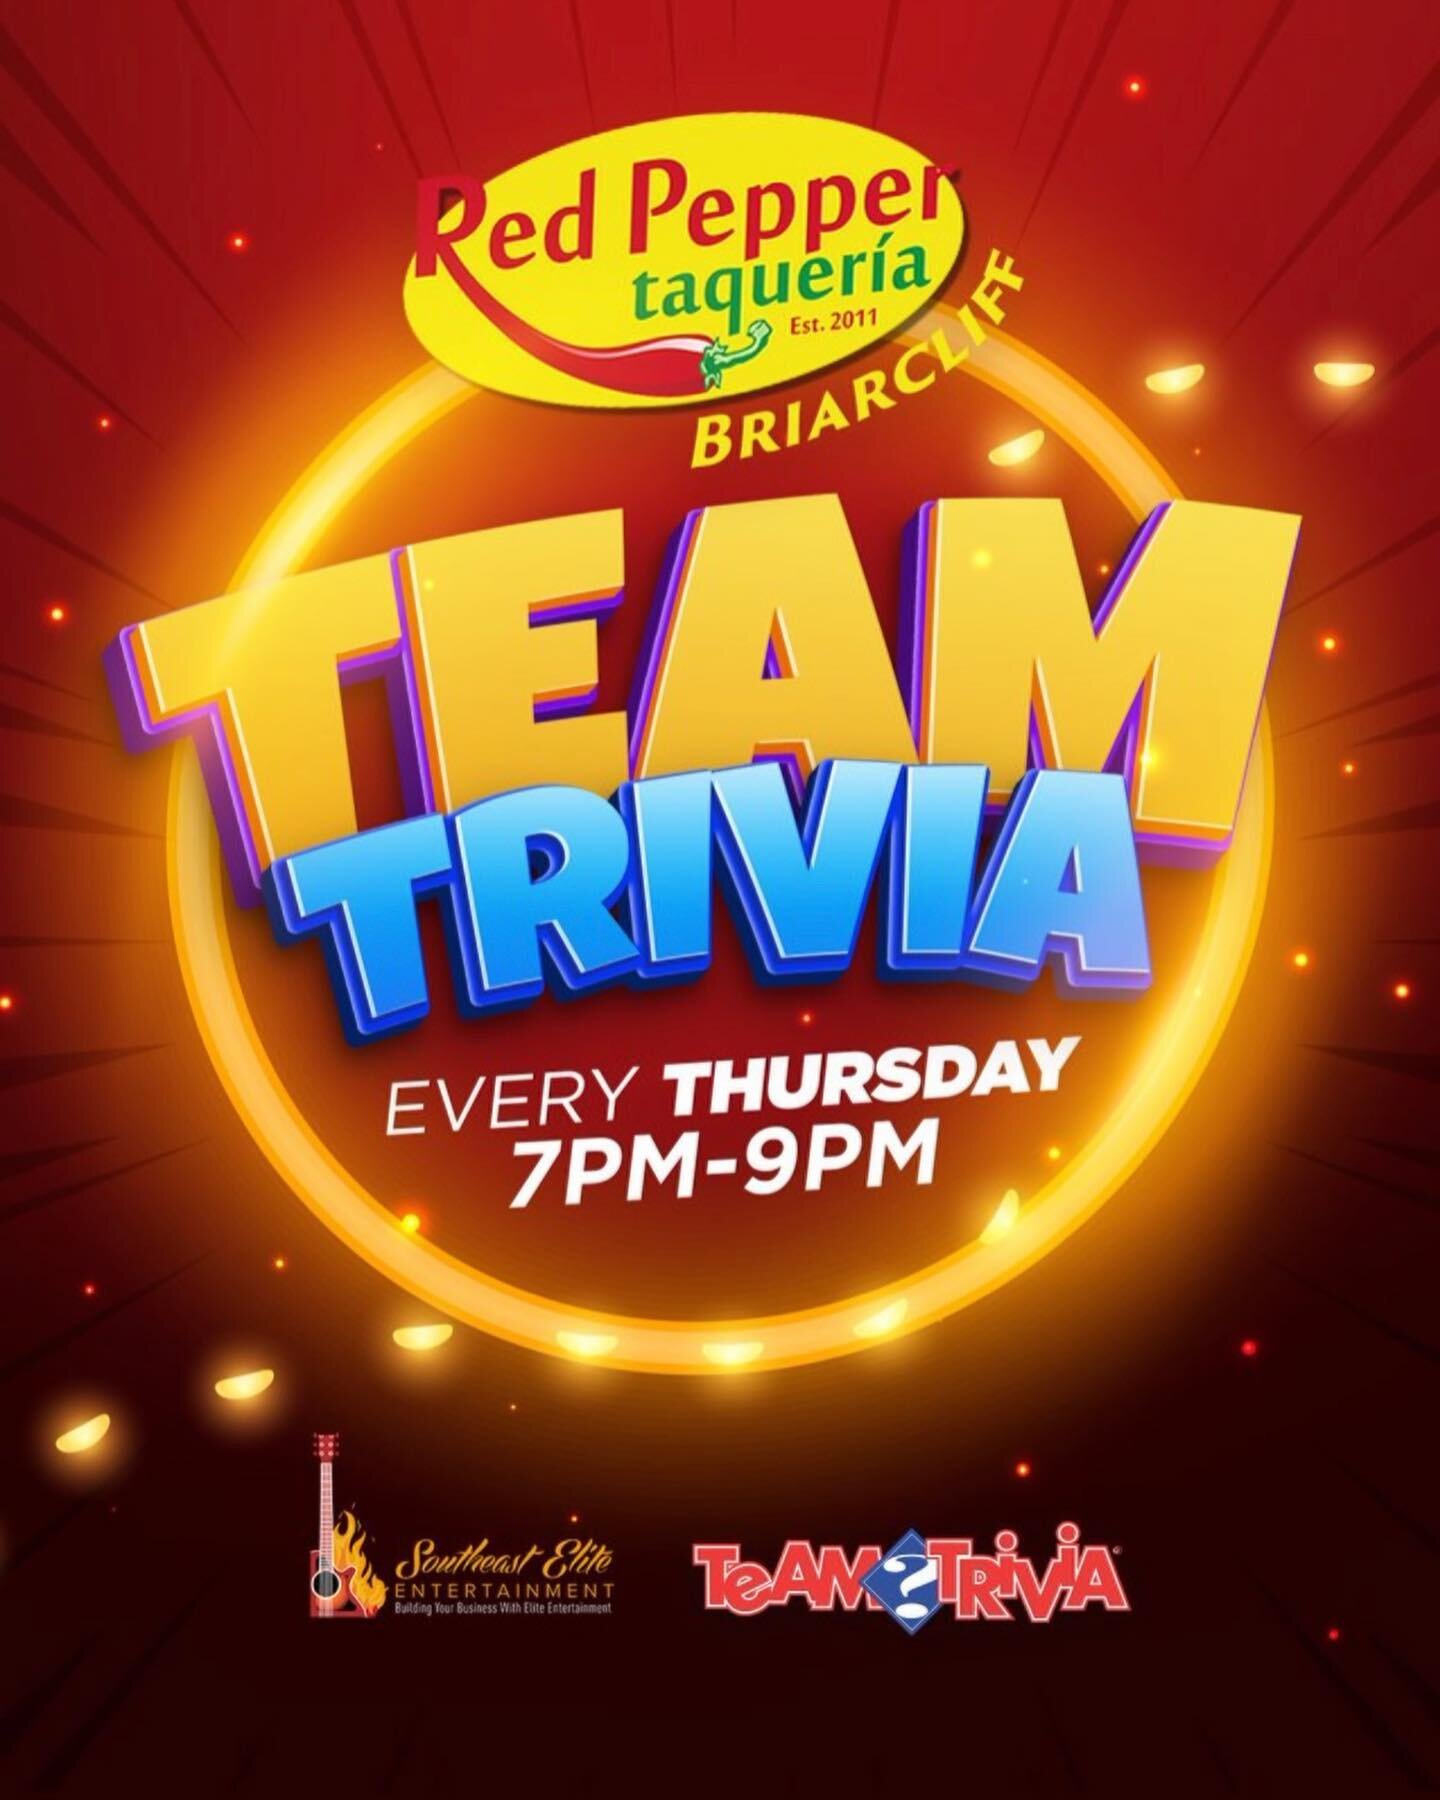 Do you love Red Pepper and Random Facts!? We&rsquo;ve got just the place for you 

Duel it out every week for your chance at a $30, $20, and $10 gift card along with bragging rights and some good solid fun